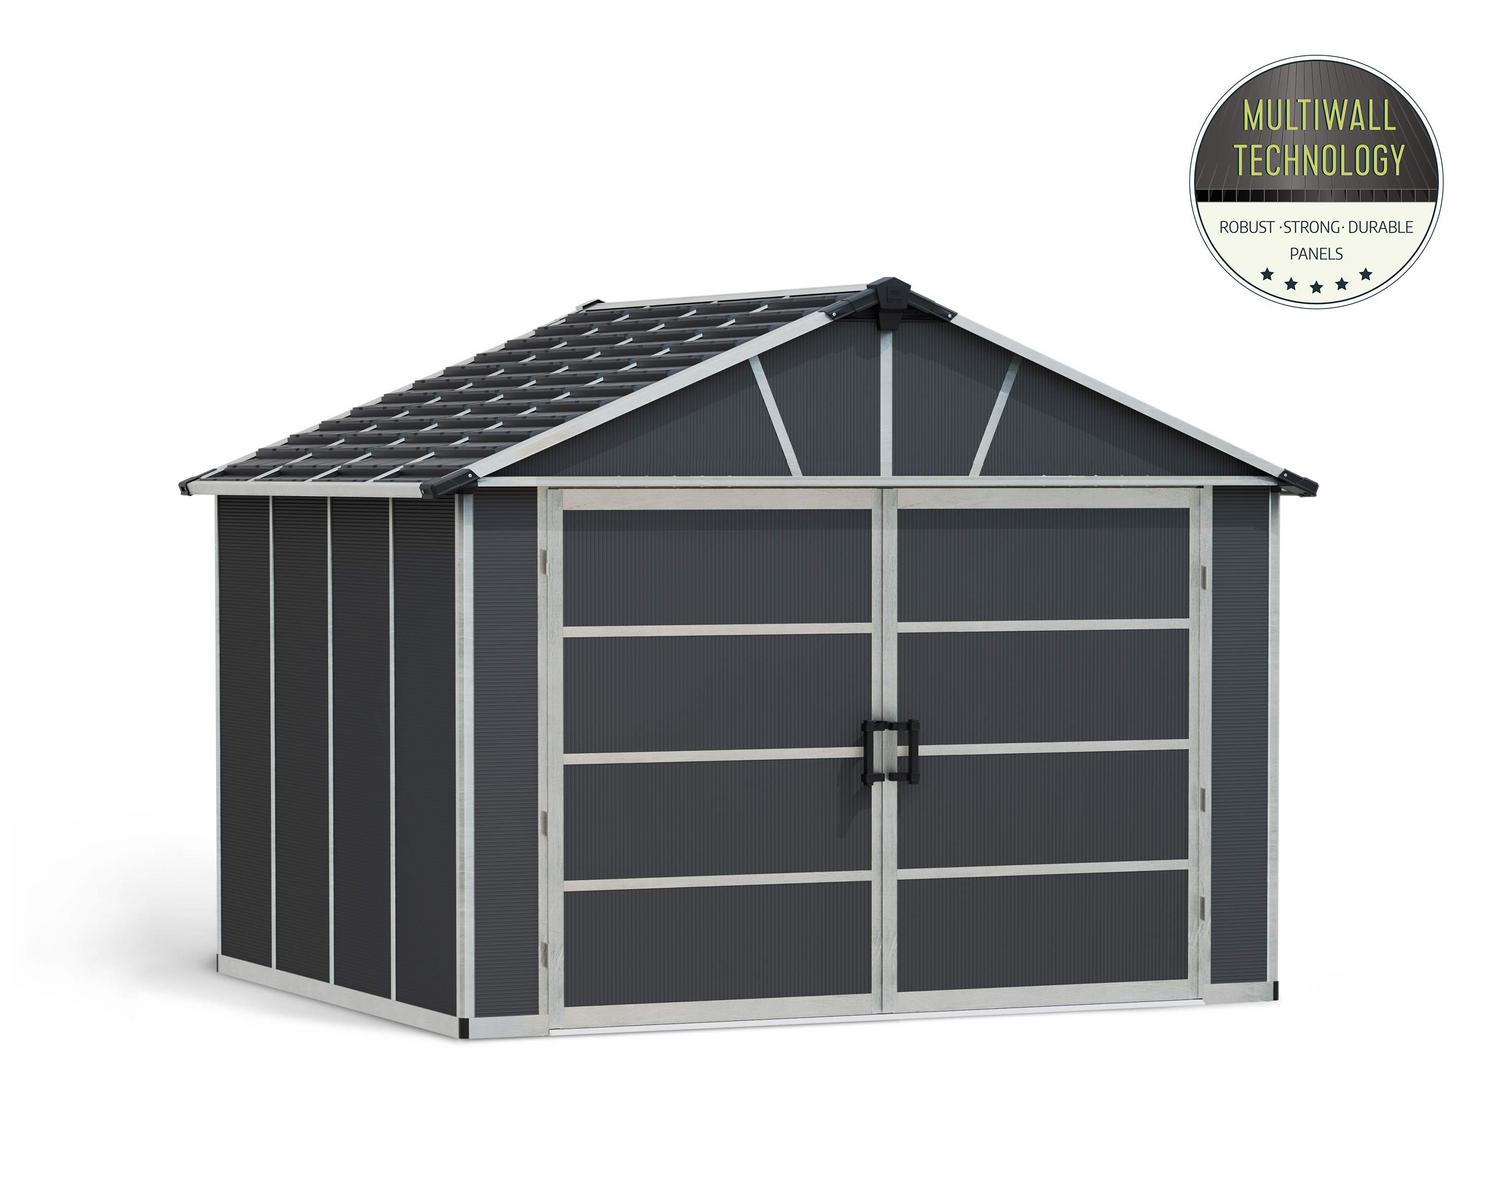 Plastic Garage Shed with Double Door Yukon 11 ft. x 9 ft. Dark Grey Polycarbonate Multiwall and Aluminum Frame